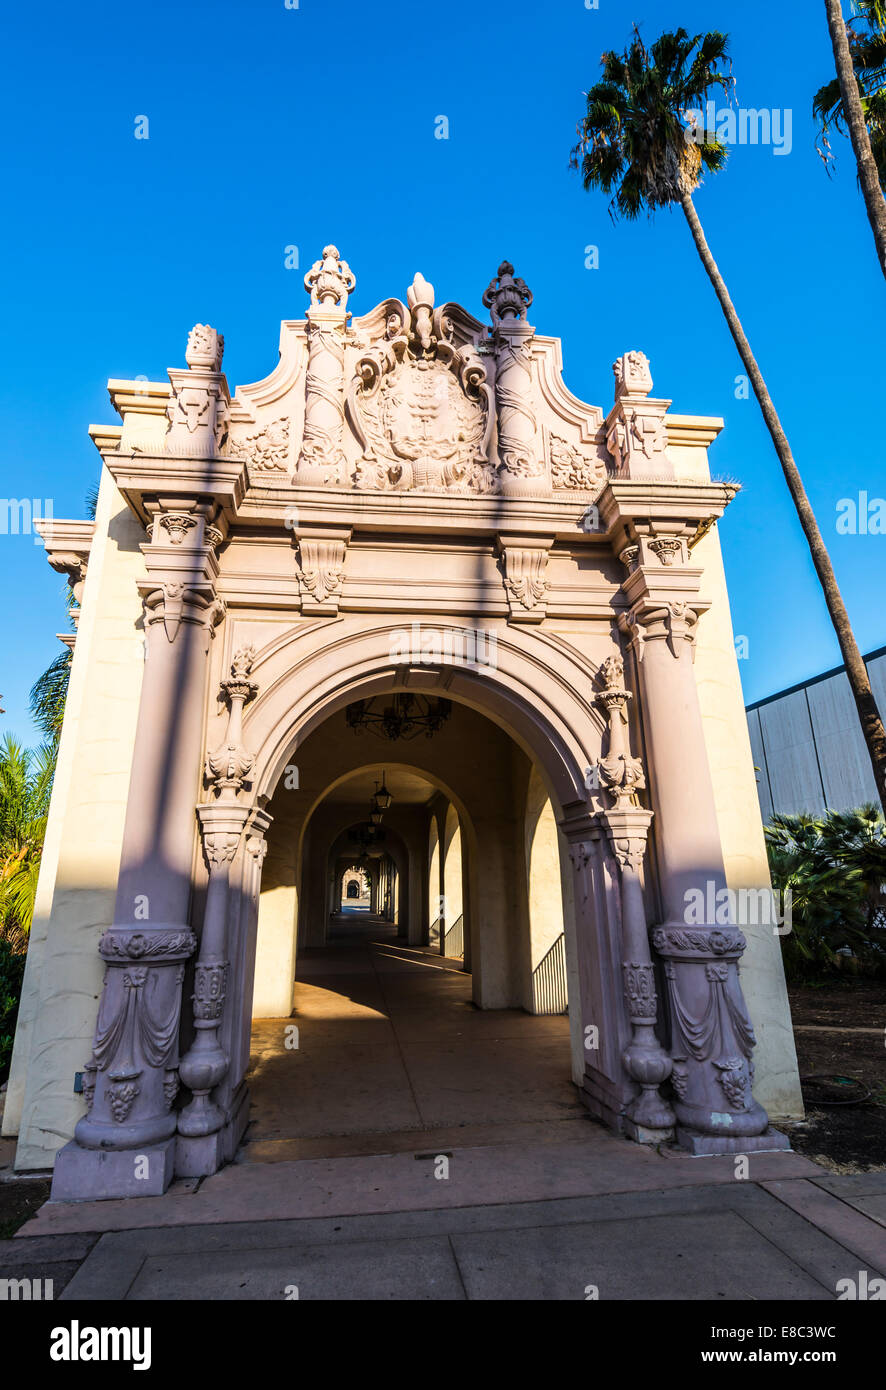 Walking path leading into an arched structure at Balboa Park. San Diego,California, United States. Stock Photo